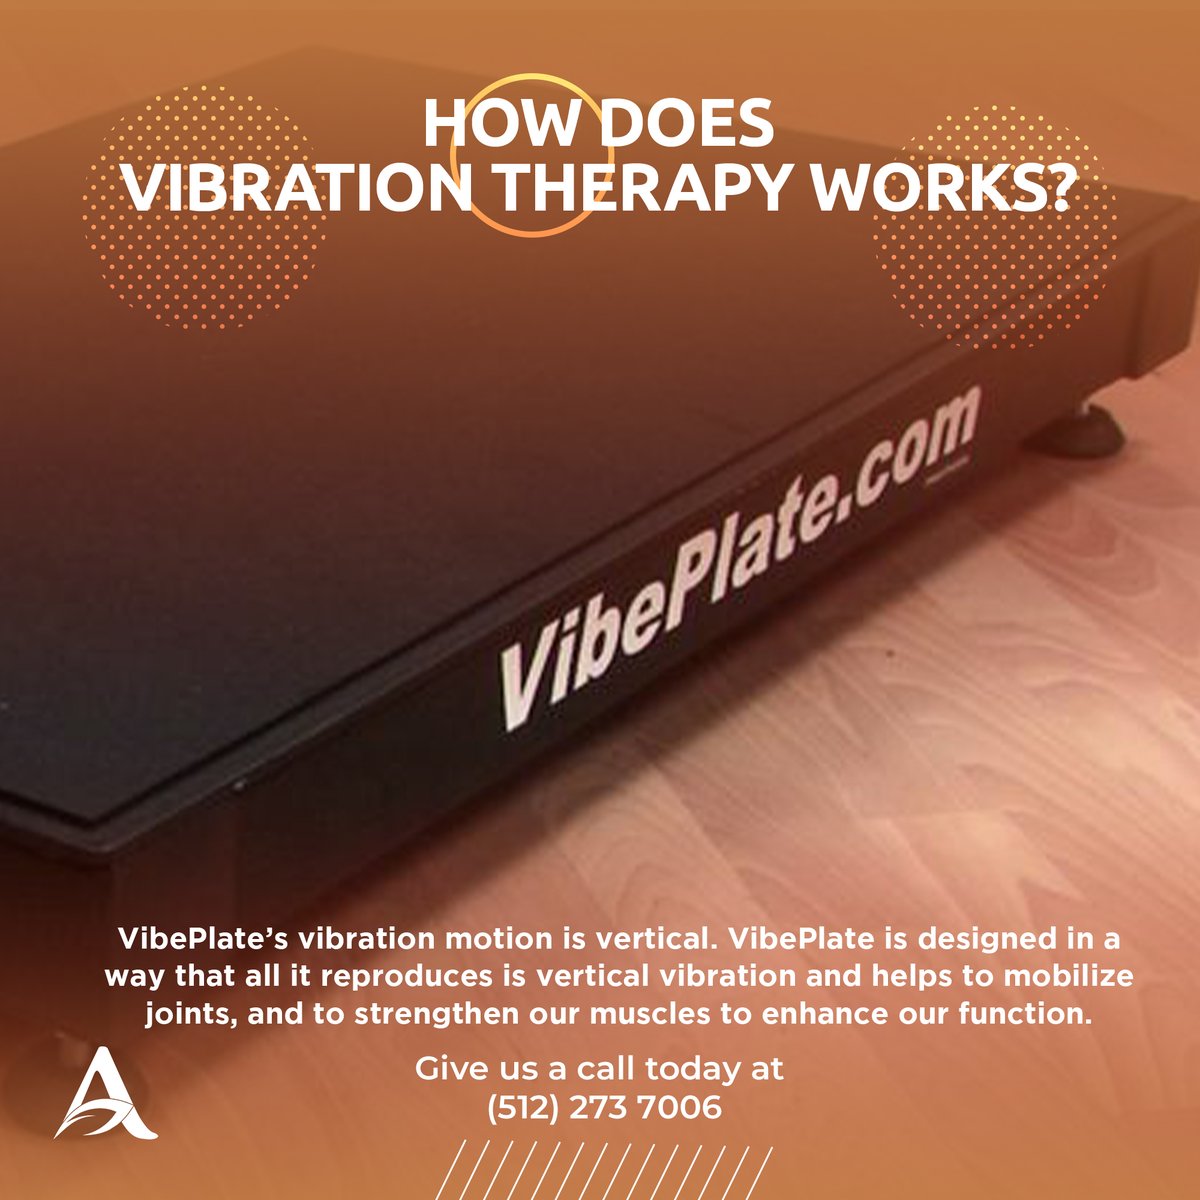 VibePlate is designed in a way that all it reproduces is vertical vibration and helps to mobilize joints, and to strengthen our muscles to enhance our function.

Schedule an Initial Exam today - bit.ly/AIH-Special